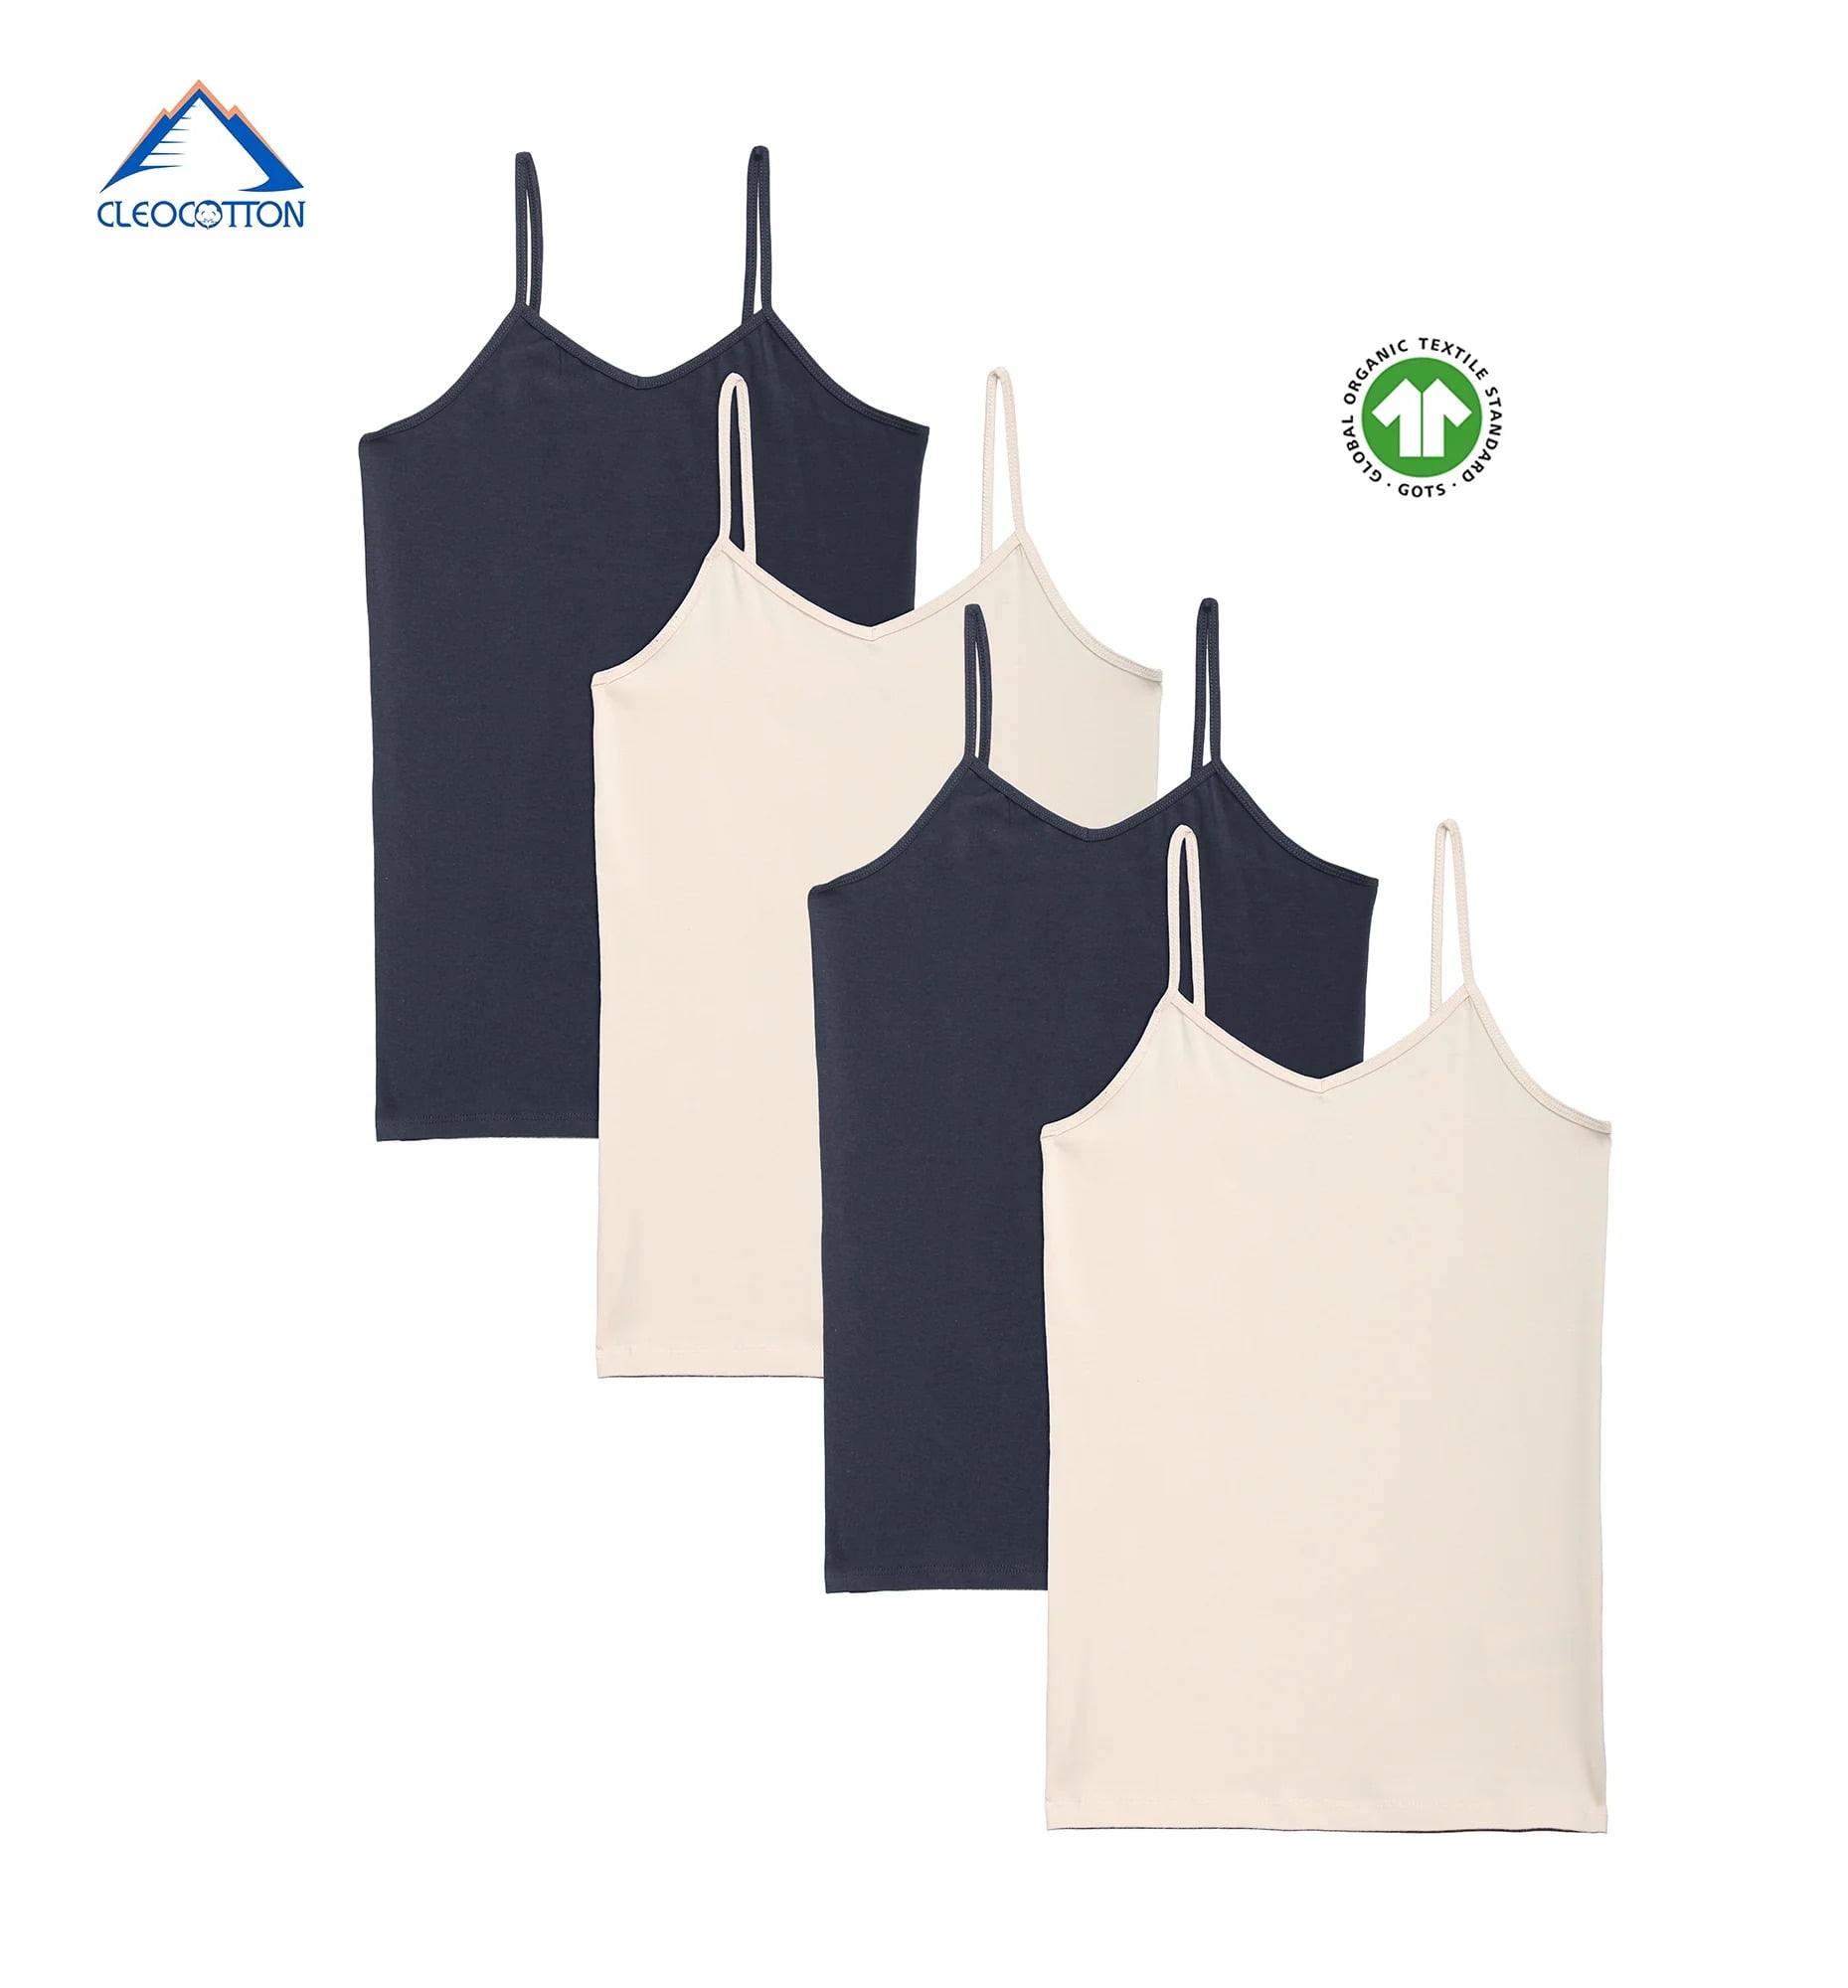  5 Pieces Girls Tank Top Sleeveless Racer Back Top Camisole Cami  Undershirts (White, Green, Grey, Dark Grey, Black,9-10 Years): Clothing,  Shoes & Jewelry